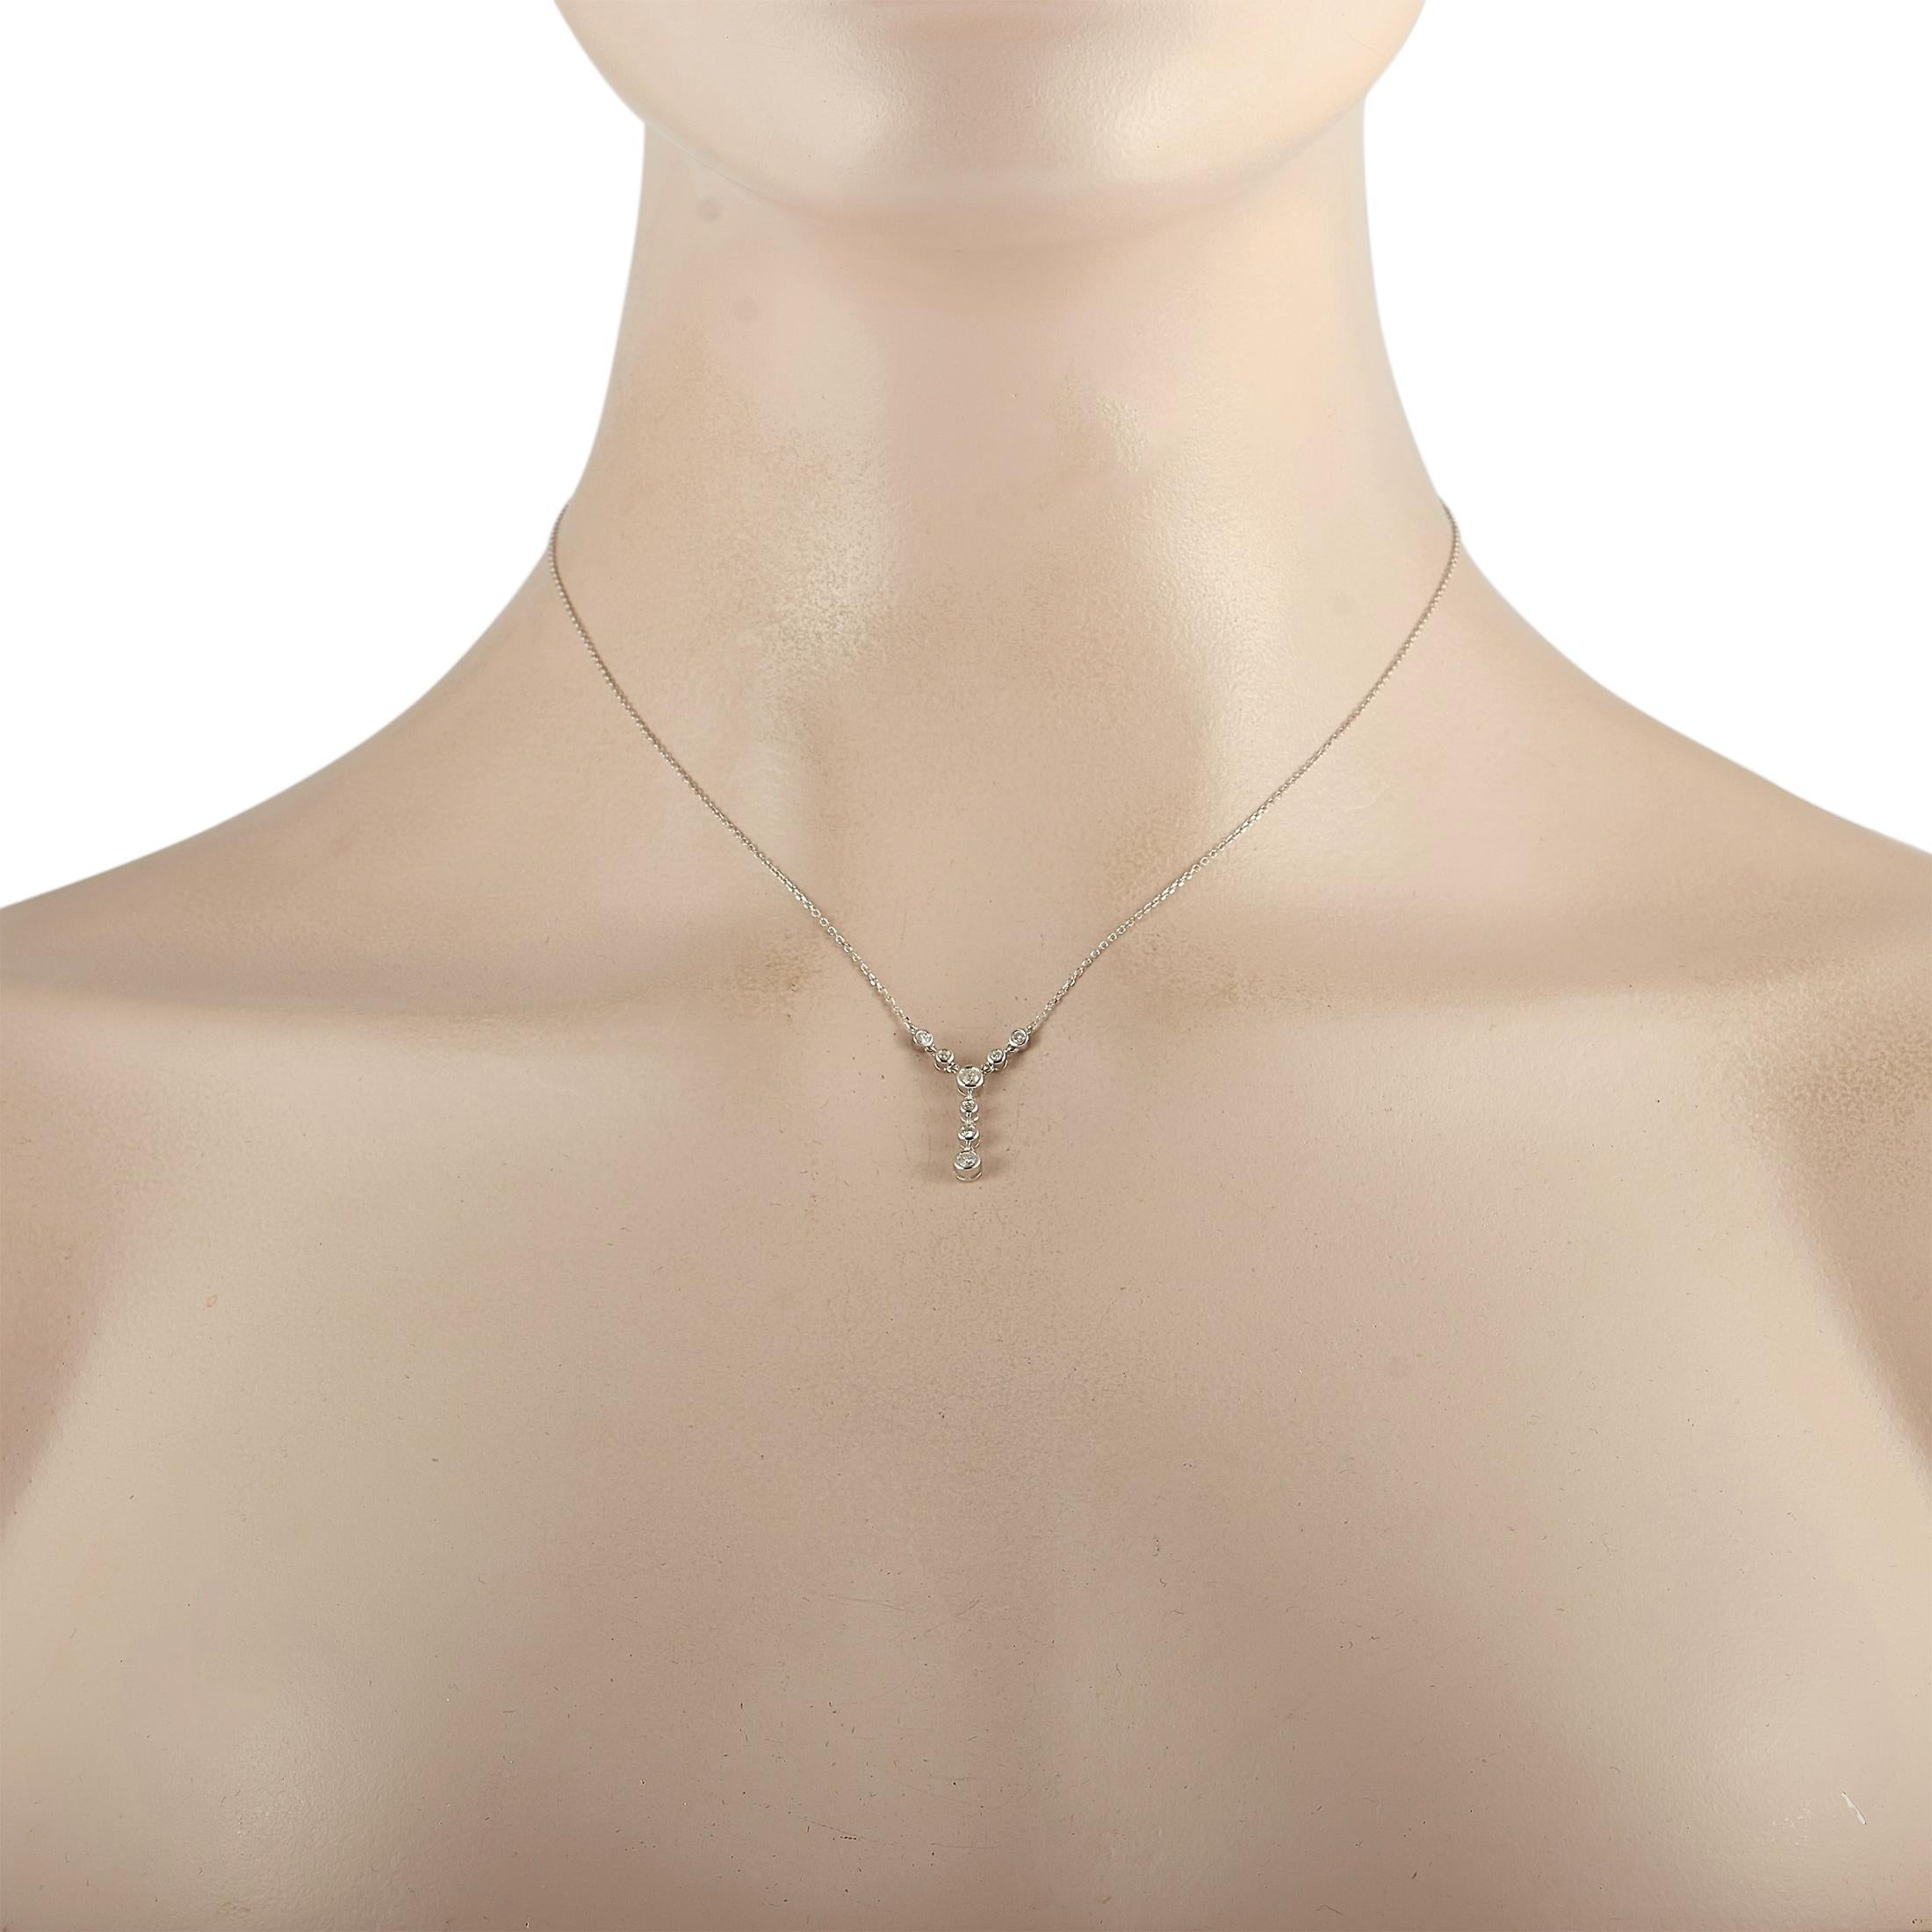 This LB Exclusive necklace is crafted from 14K white gold and weighs 2.1 grams. It is presented with a 15” chain and a pendant that measures 0.62” in length and 0.12” in width. The necklace is embellished with diamonds that total 0.25 carats.
 
